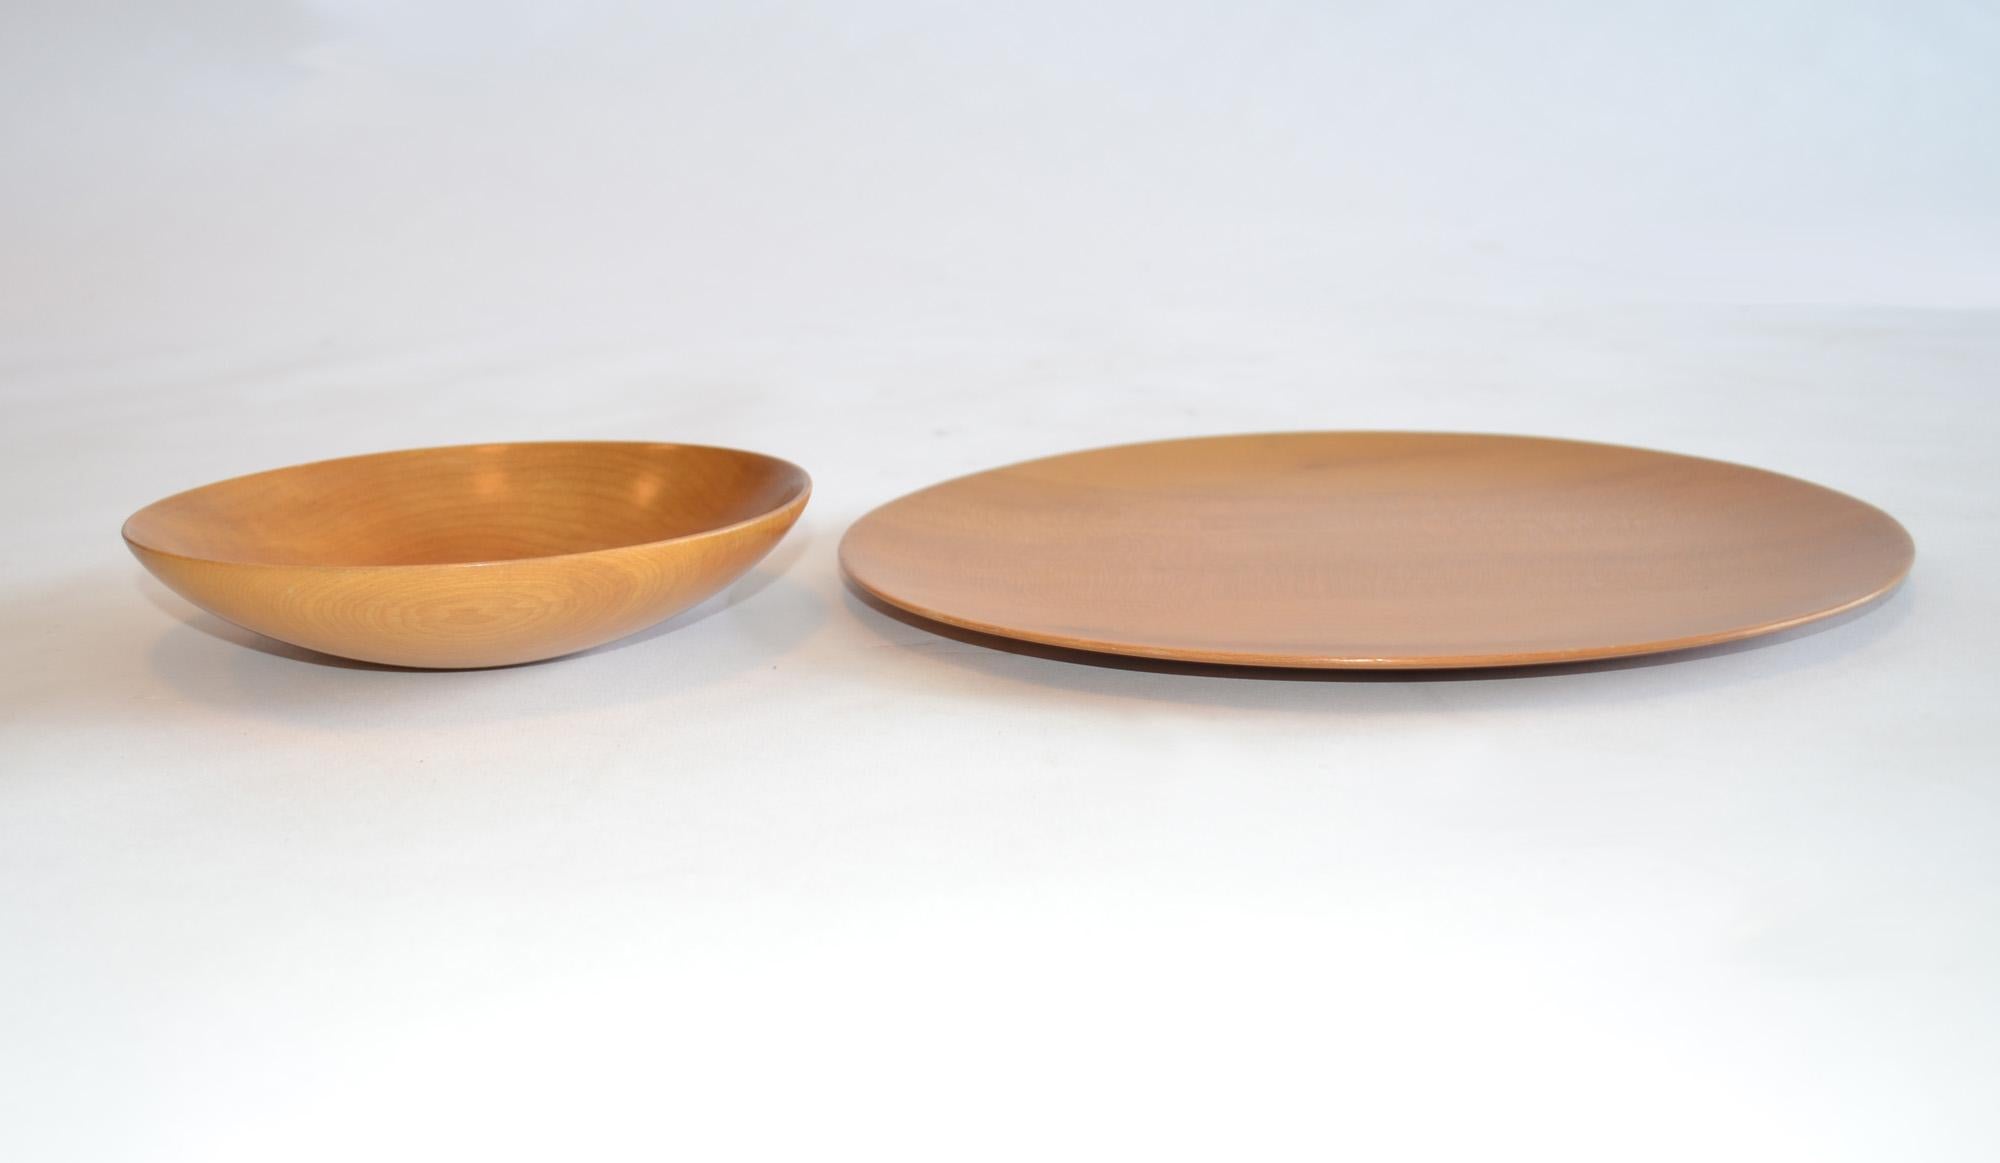 Turned wood bowl and platter by James Prestini, circa 1950s
Turned wood bowl and platter by James Prestini, circa 1950s. These pieces are exceptional examples of his work and are in excellent condition. A wonderful small low bowl in walnut and a